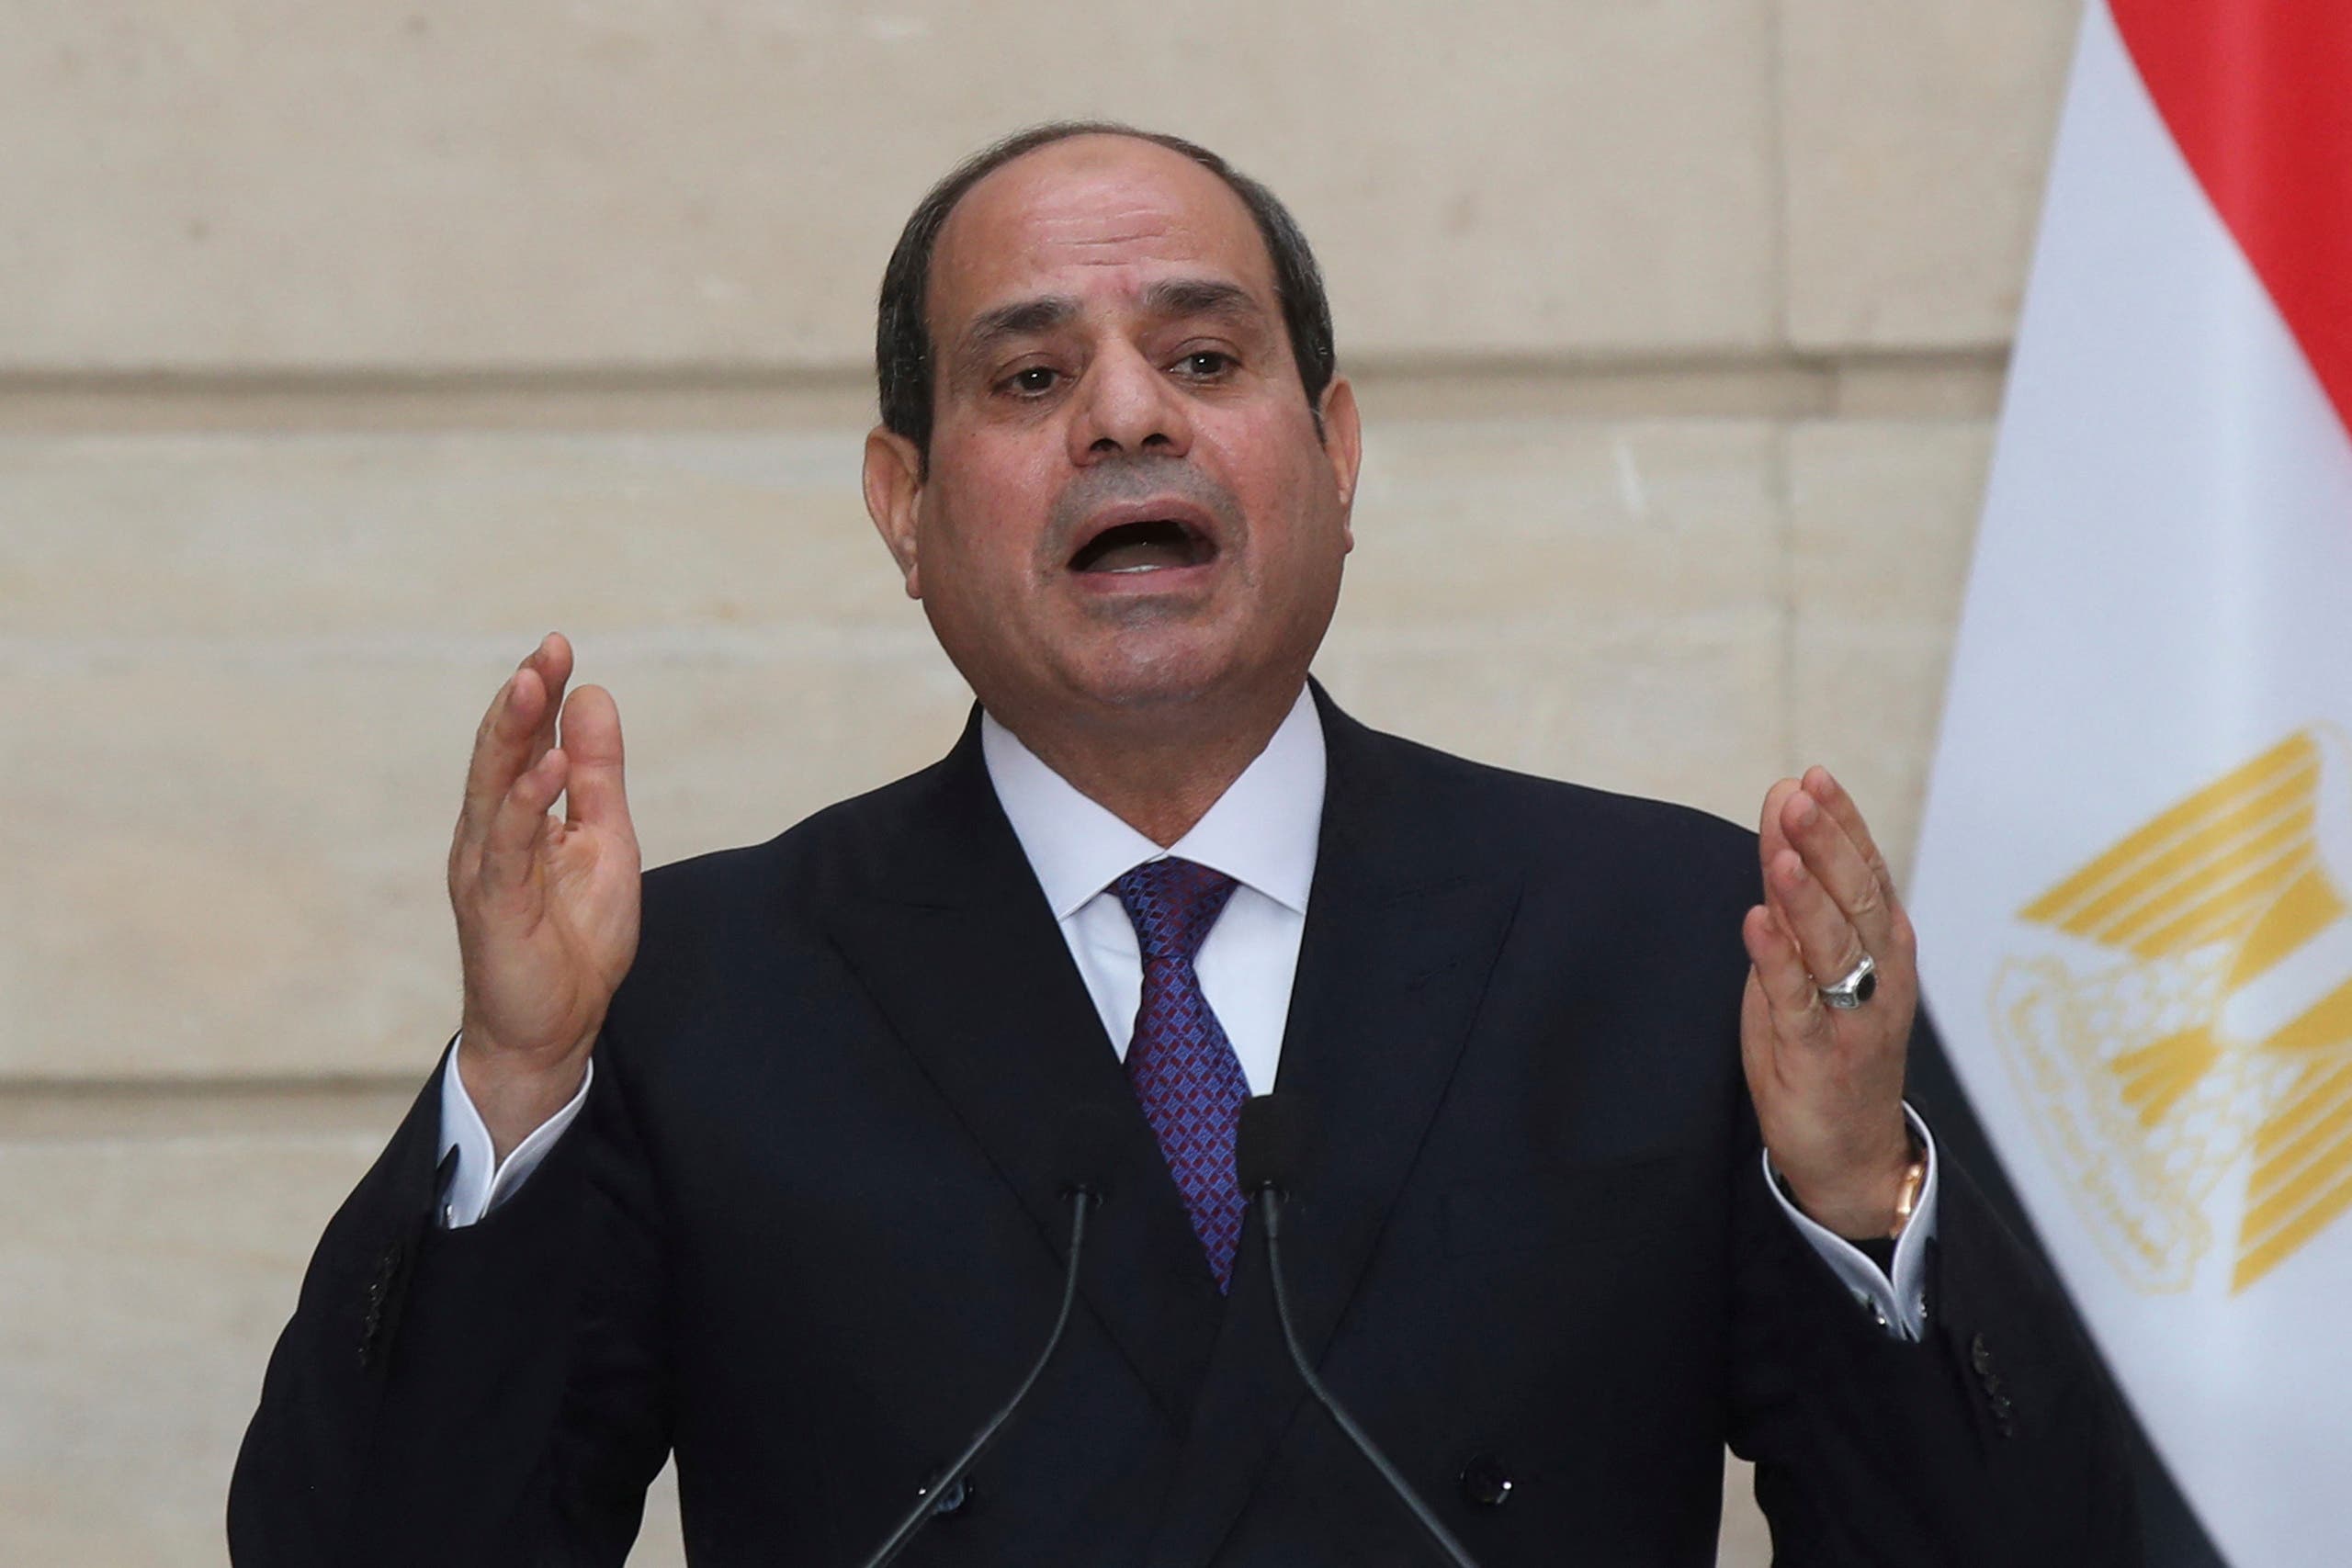 Egyptian President Abdel Fattah al-Sisi speaks during a press conference with French President following their meeting at the Elysee presidential Palace on December 7, 2020 in Paris, as part of al-Sisi's three-day controversial state visit to France, with activists warning Paris not to turn a blind eye to Cairo's rights record with a red carpet welcome. (Stock photo)